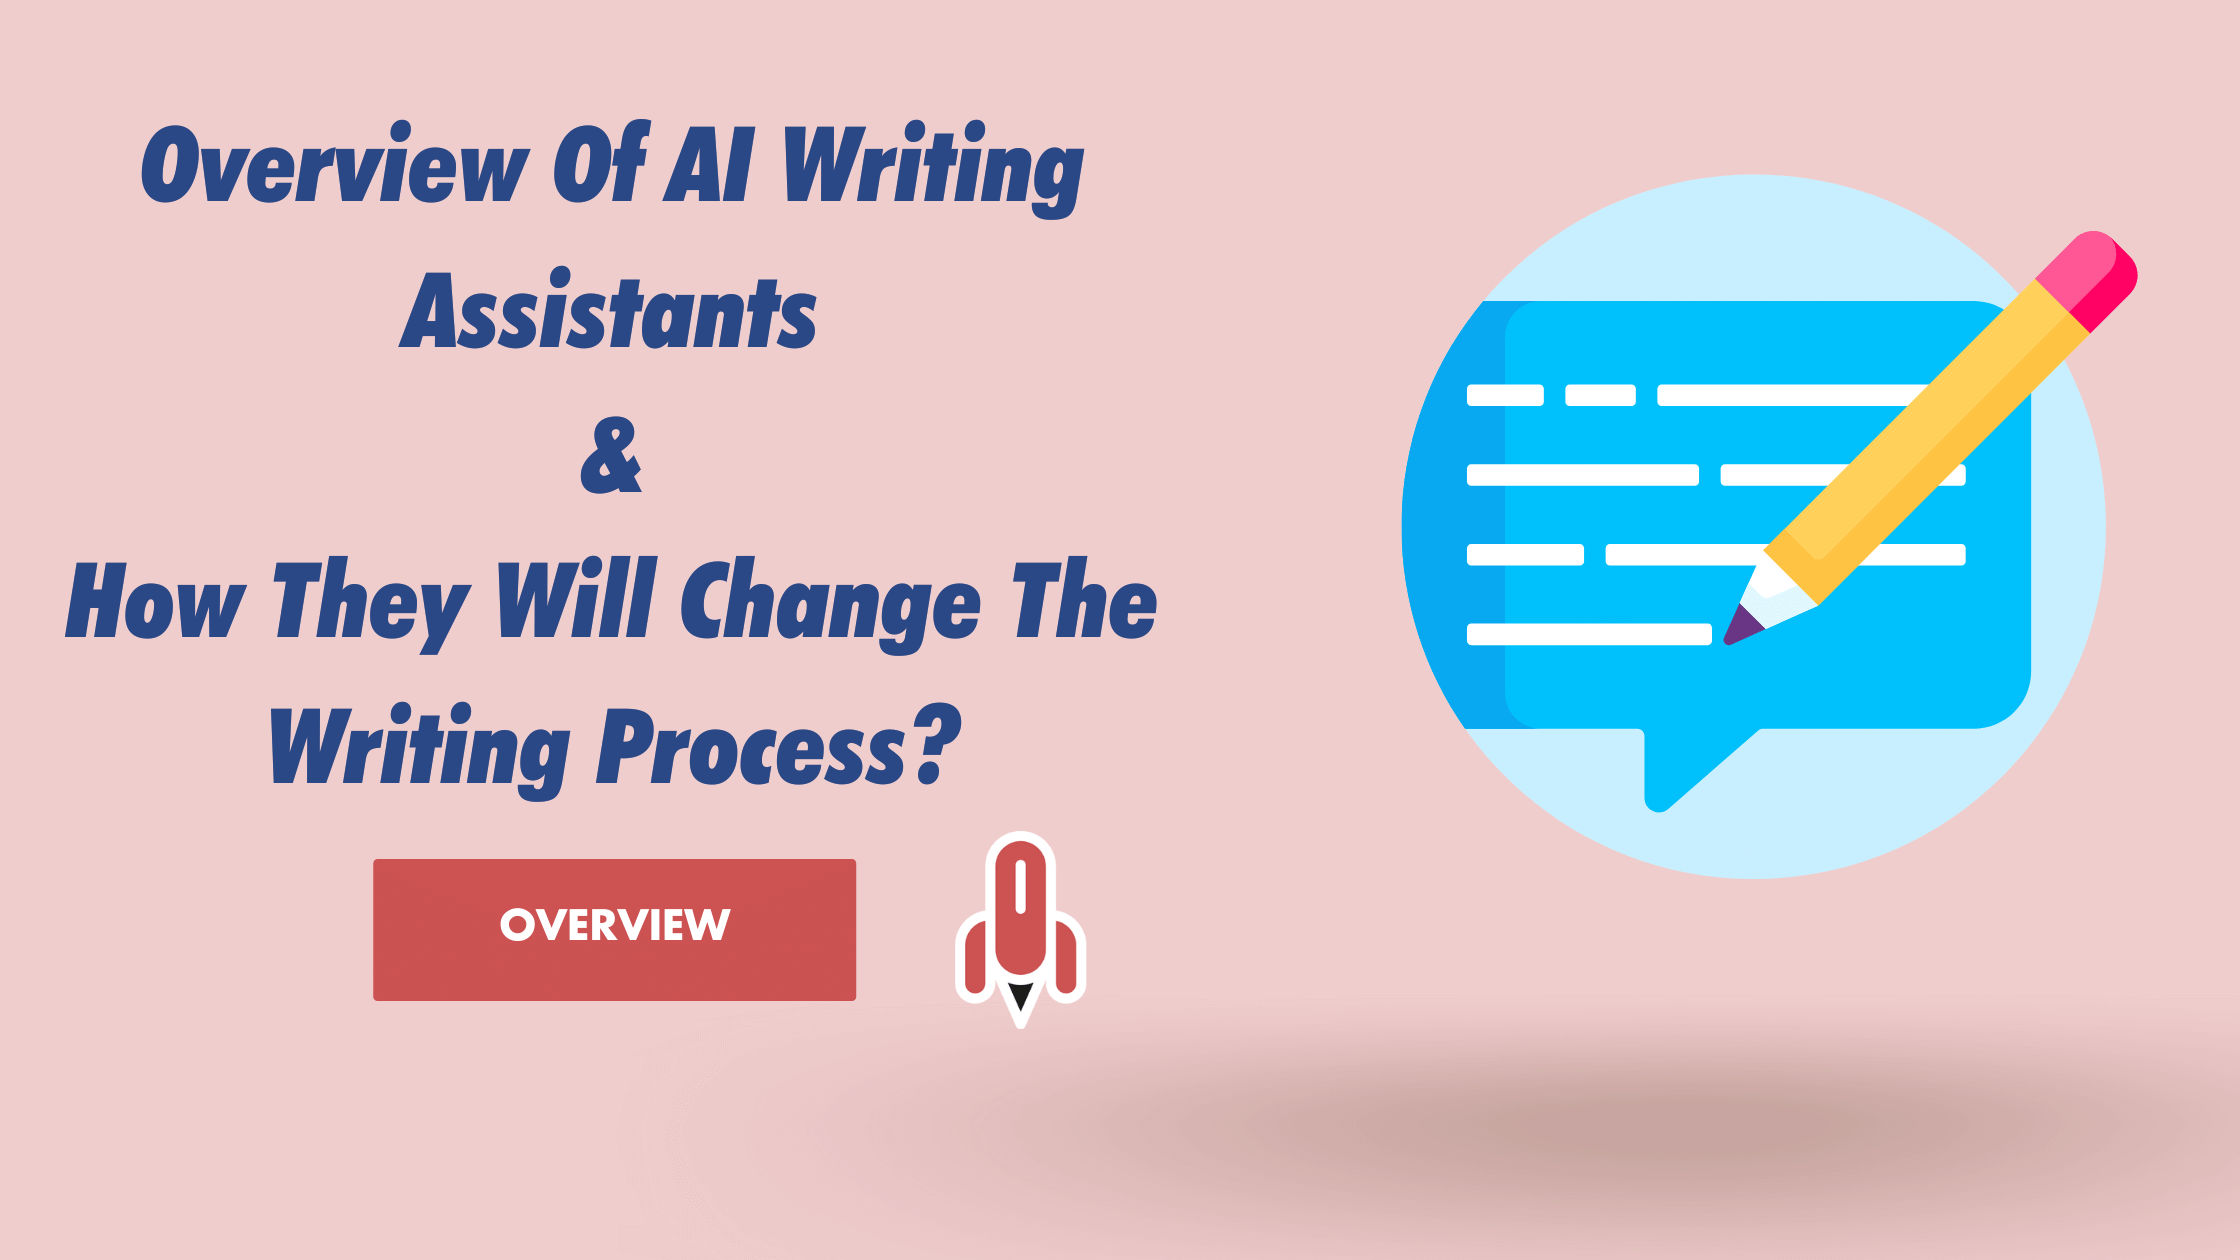 Overview Of AI Writing Assistants & How They Will Change The Writing Process